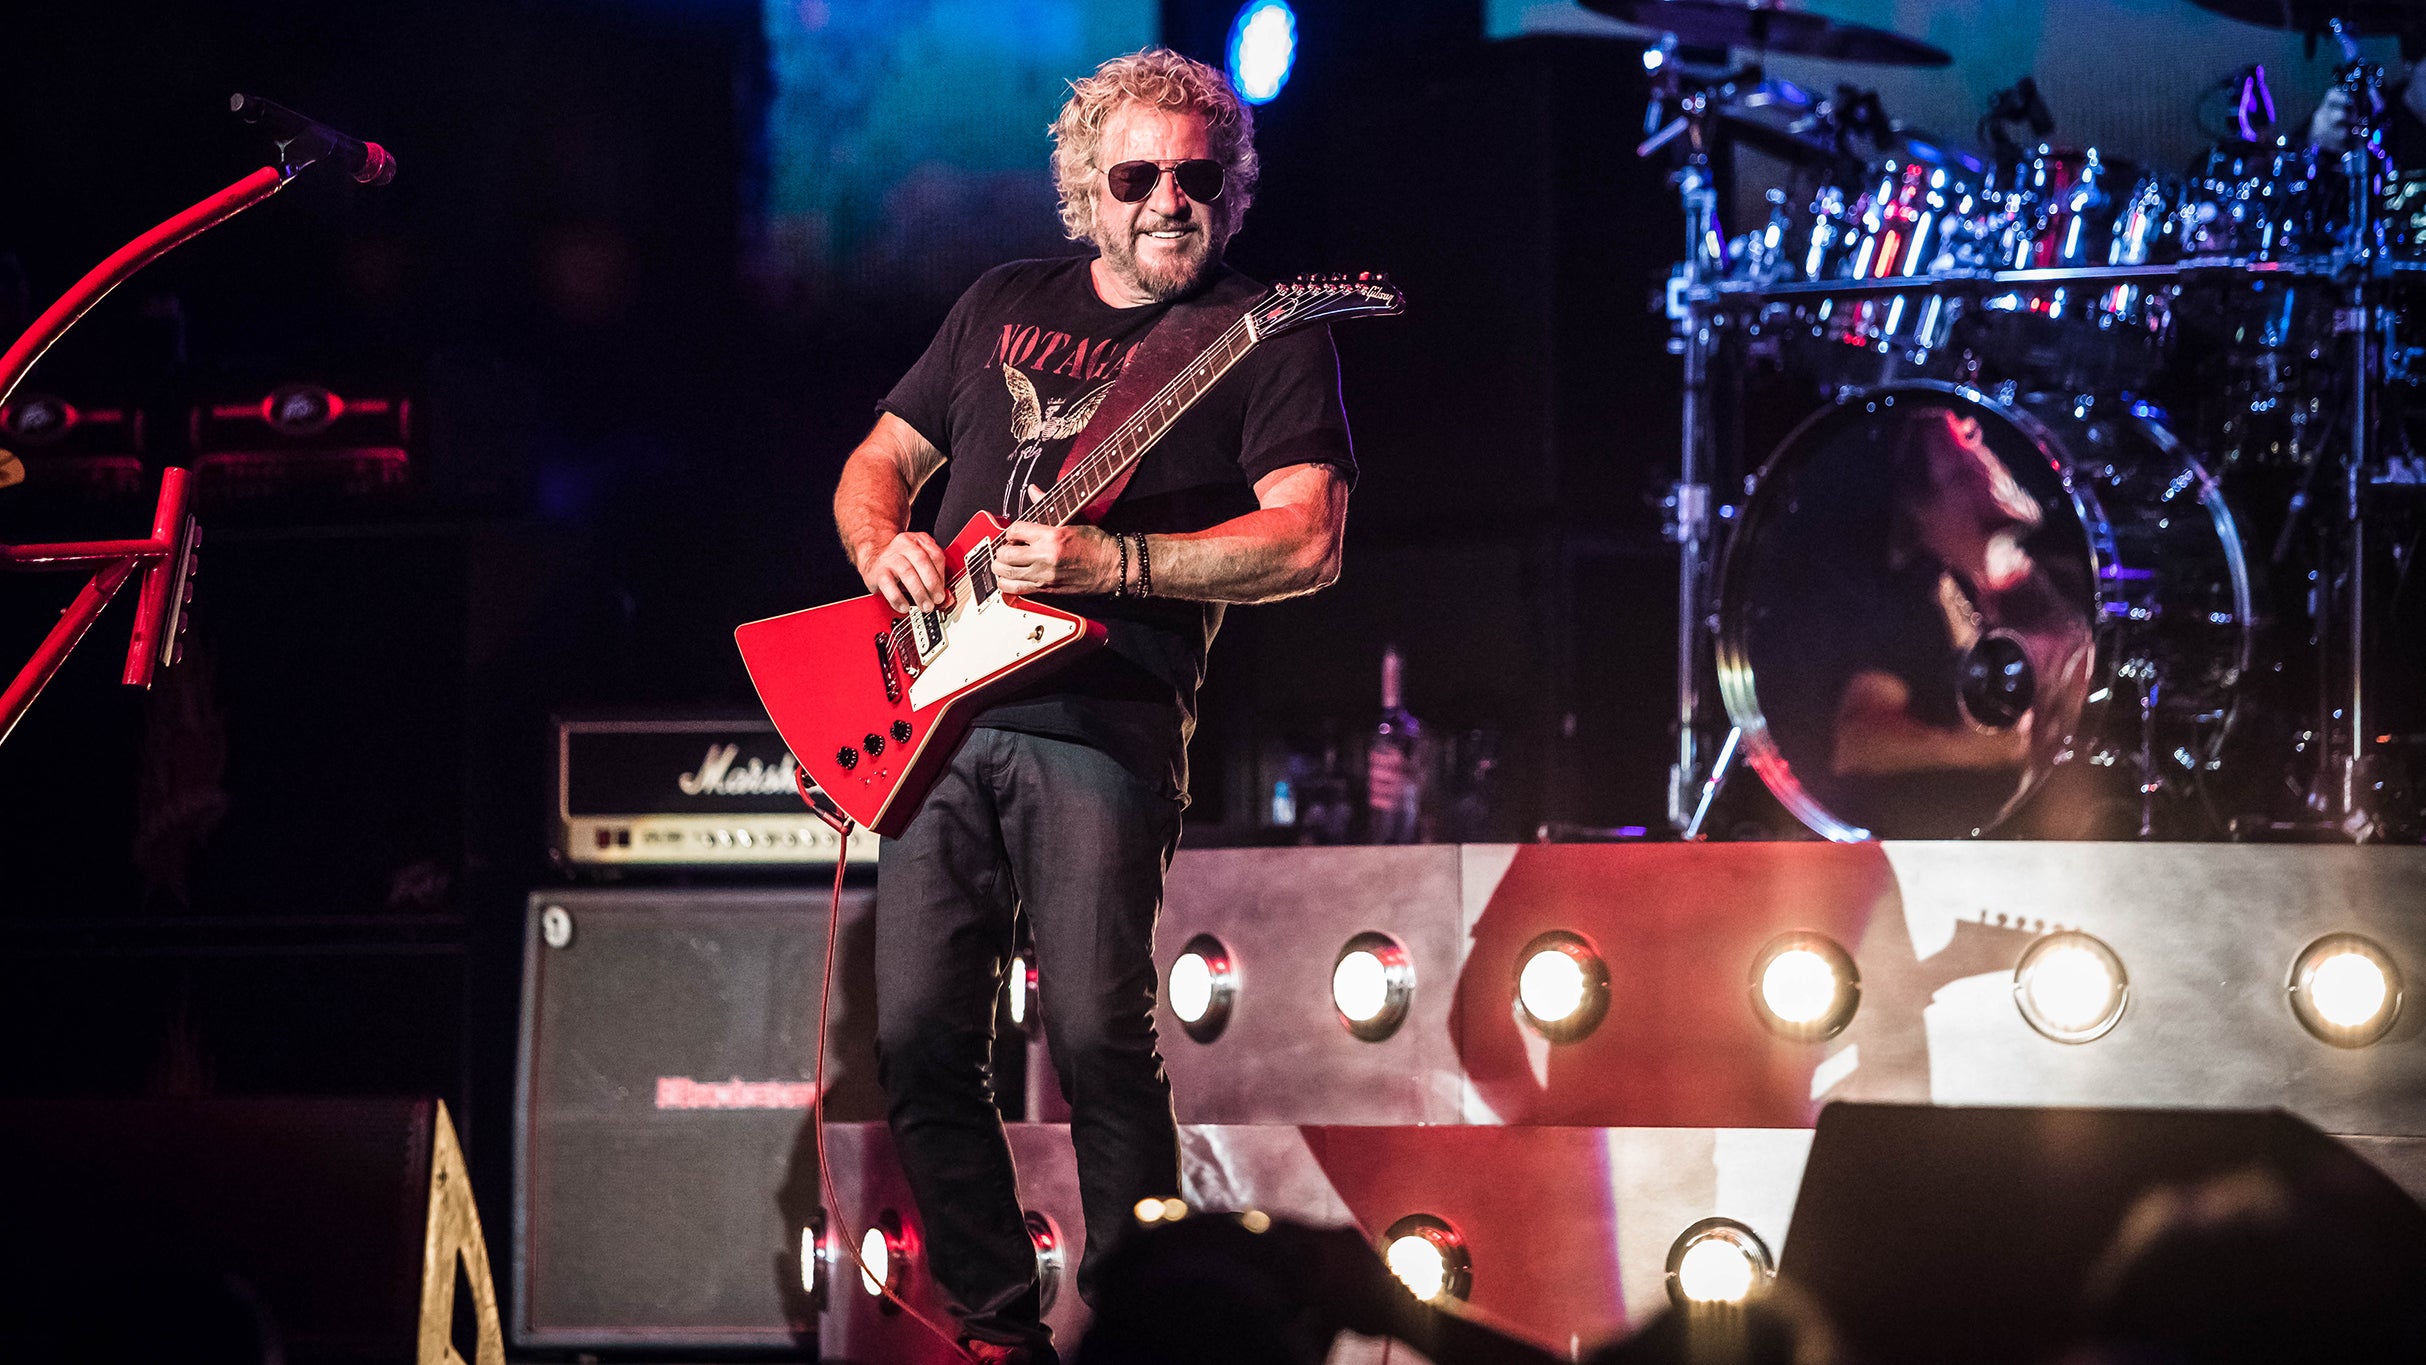 SAMMY HAGAR The Best of All Worlds Tour with special guest Loverboy in Nashville promo photo for Citi® Cardmember Preferred presale offer code